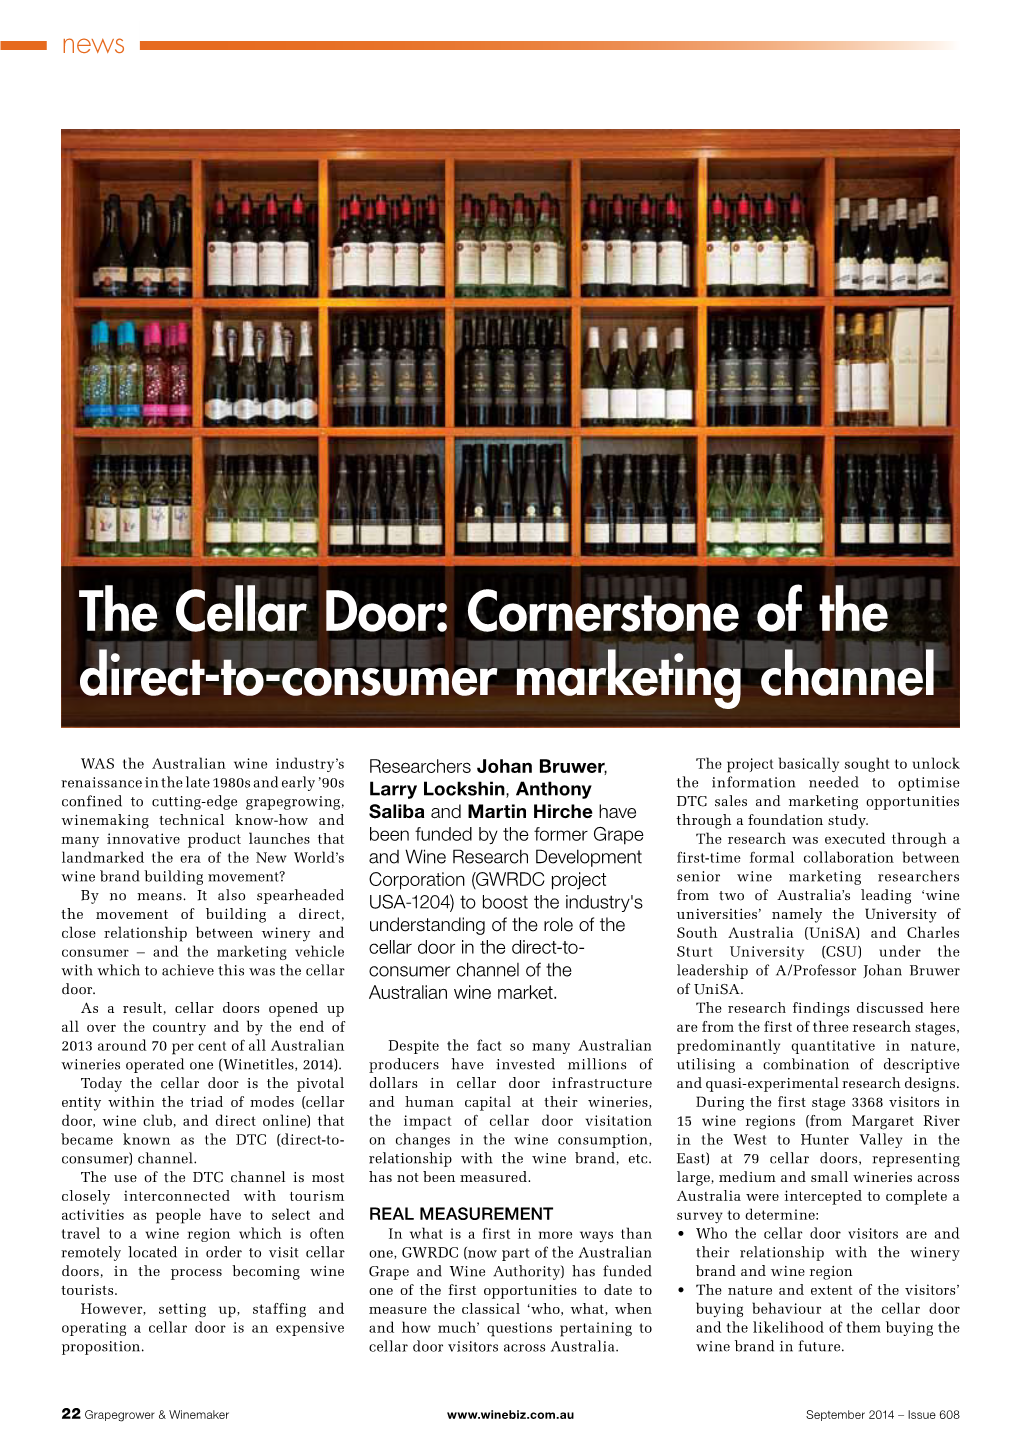 The Cellar Door: Cornerstone of the Direct-To-Consumer Marketing Channel